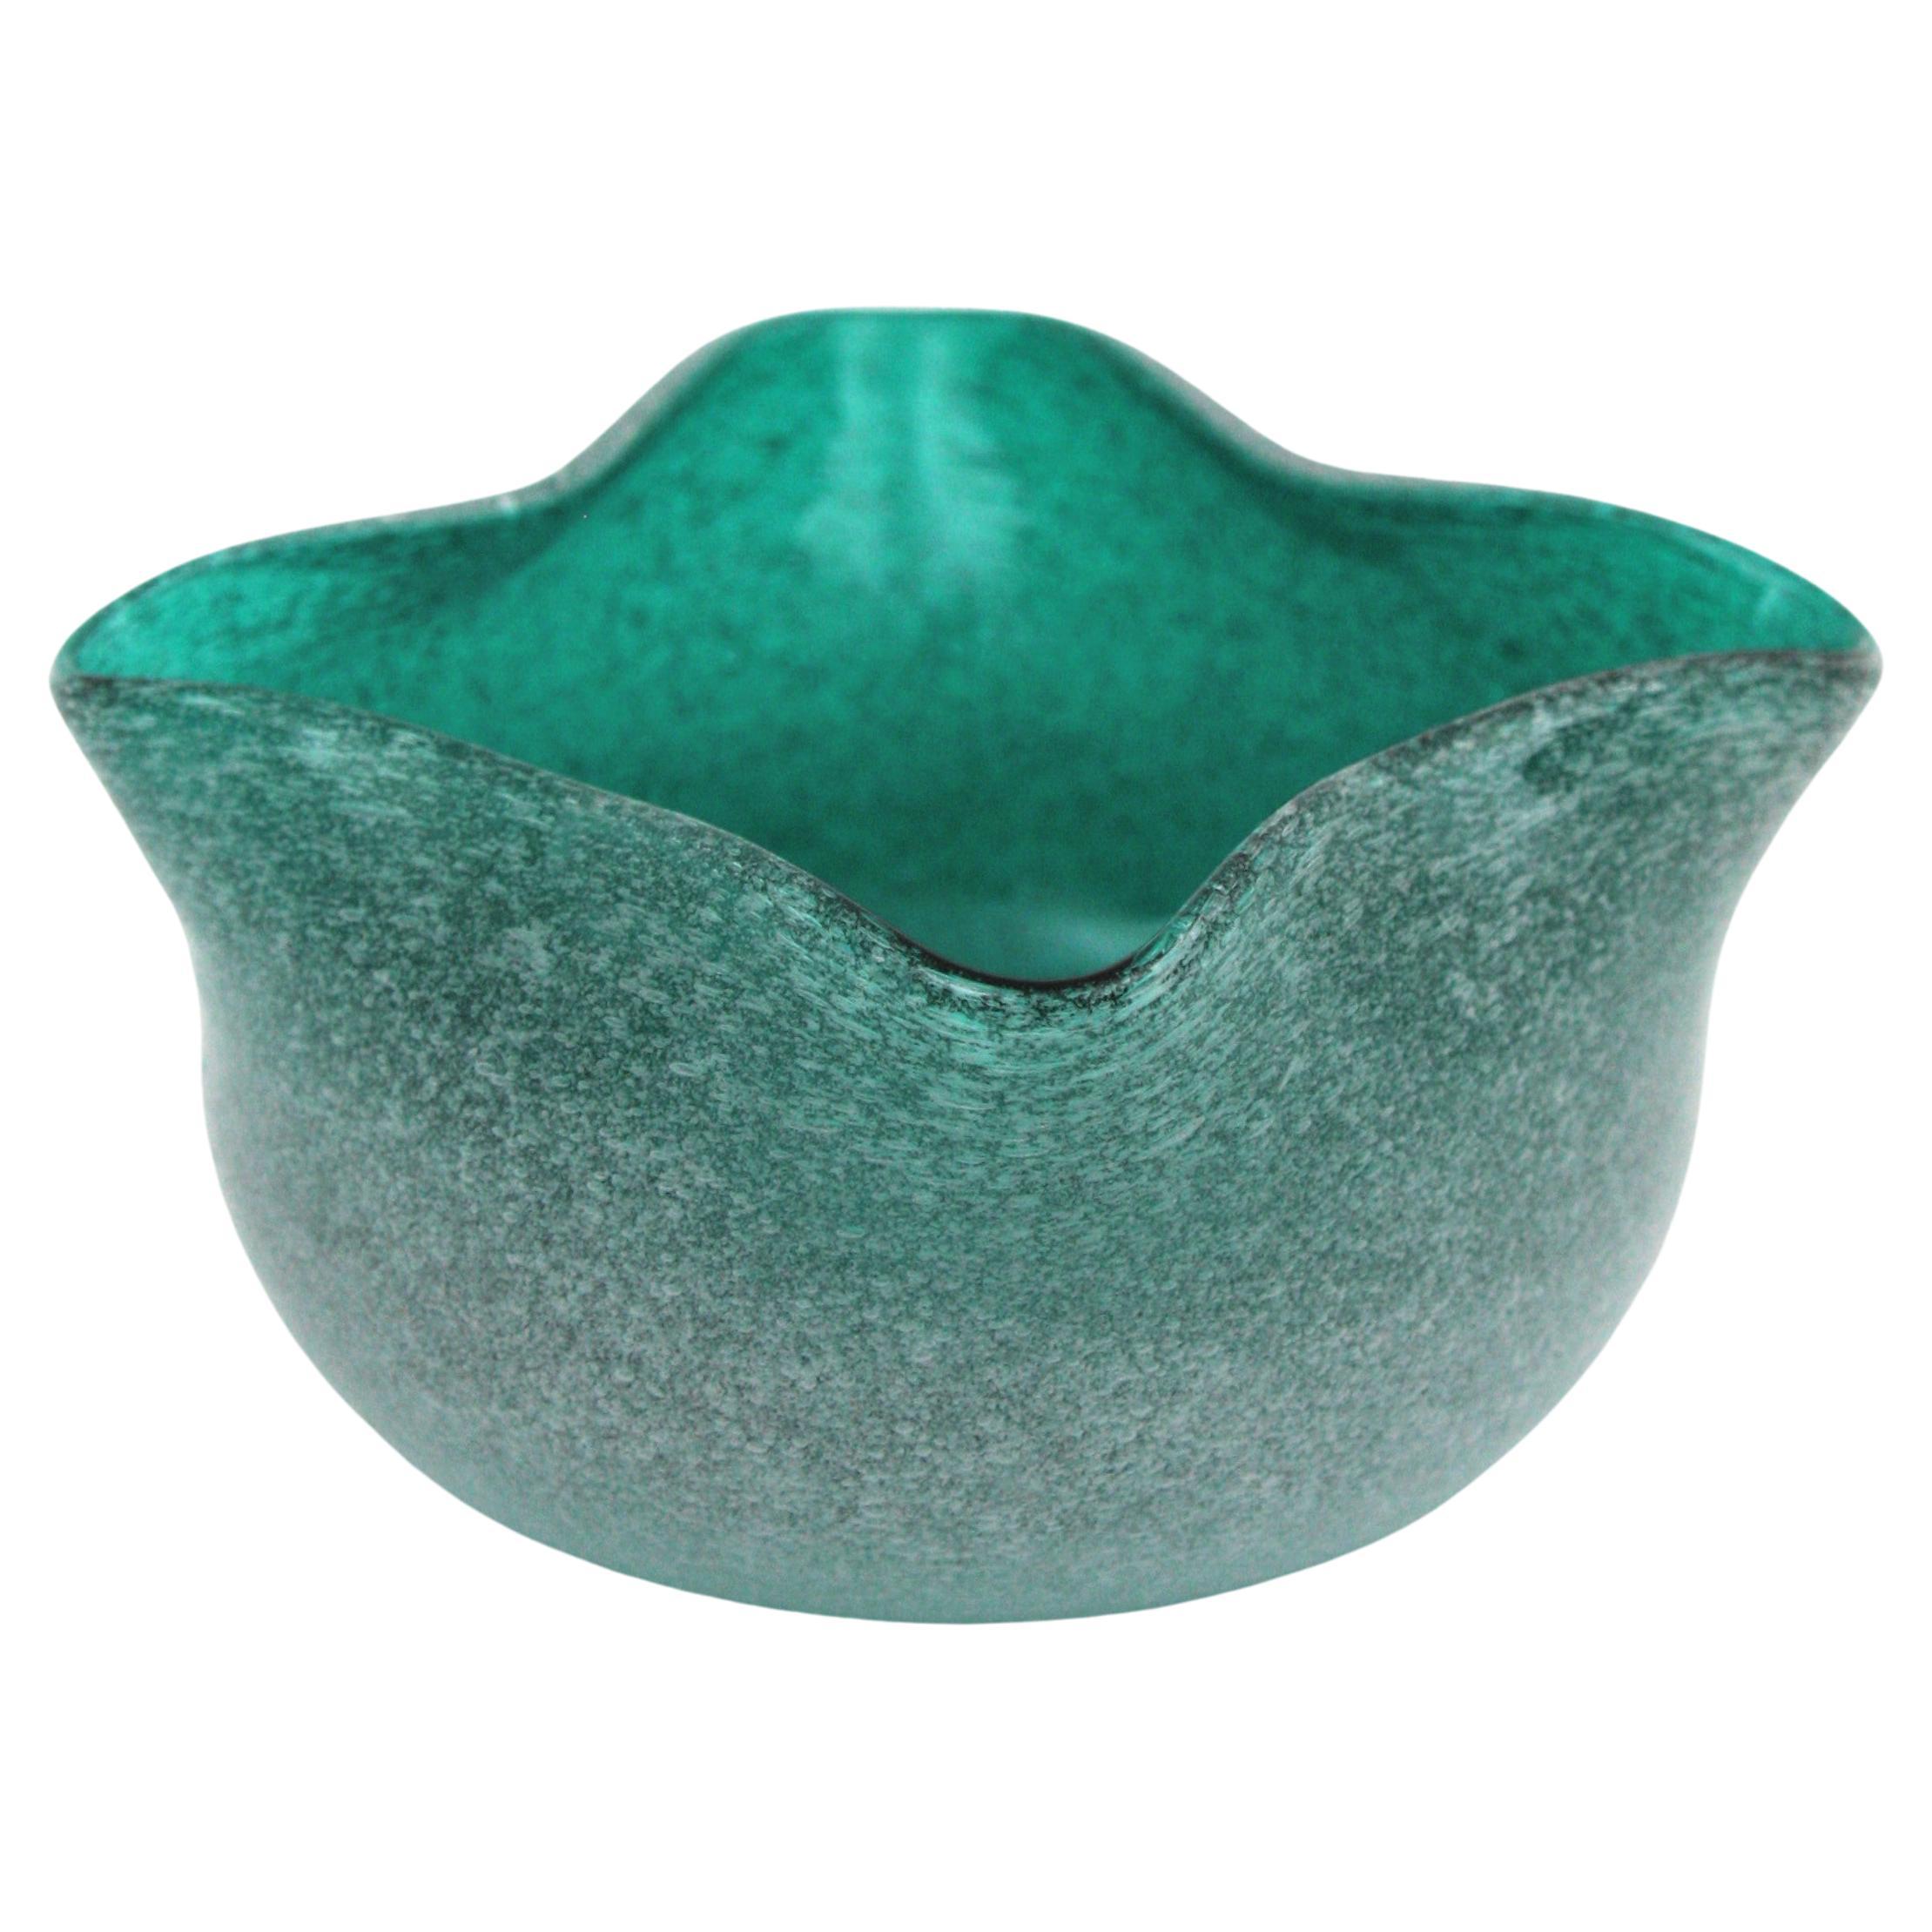 Hand blown Murano art glass bowl in green color with inner bubbles. Attributed to Seguso Vetri D'Arte, Italy 1950s.
This small bowl has been made with the 'pulegoso' technique, the glass has million of inner air bubbles that give an spongy